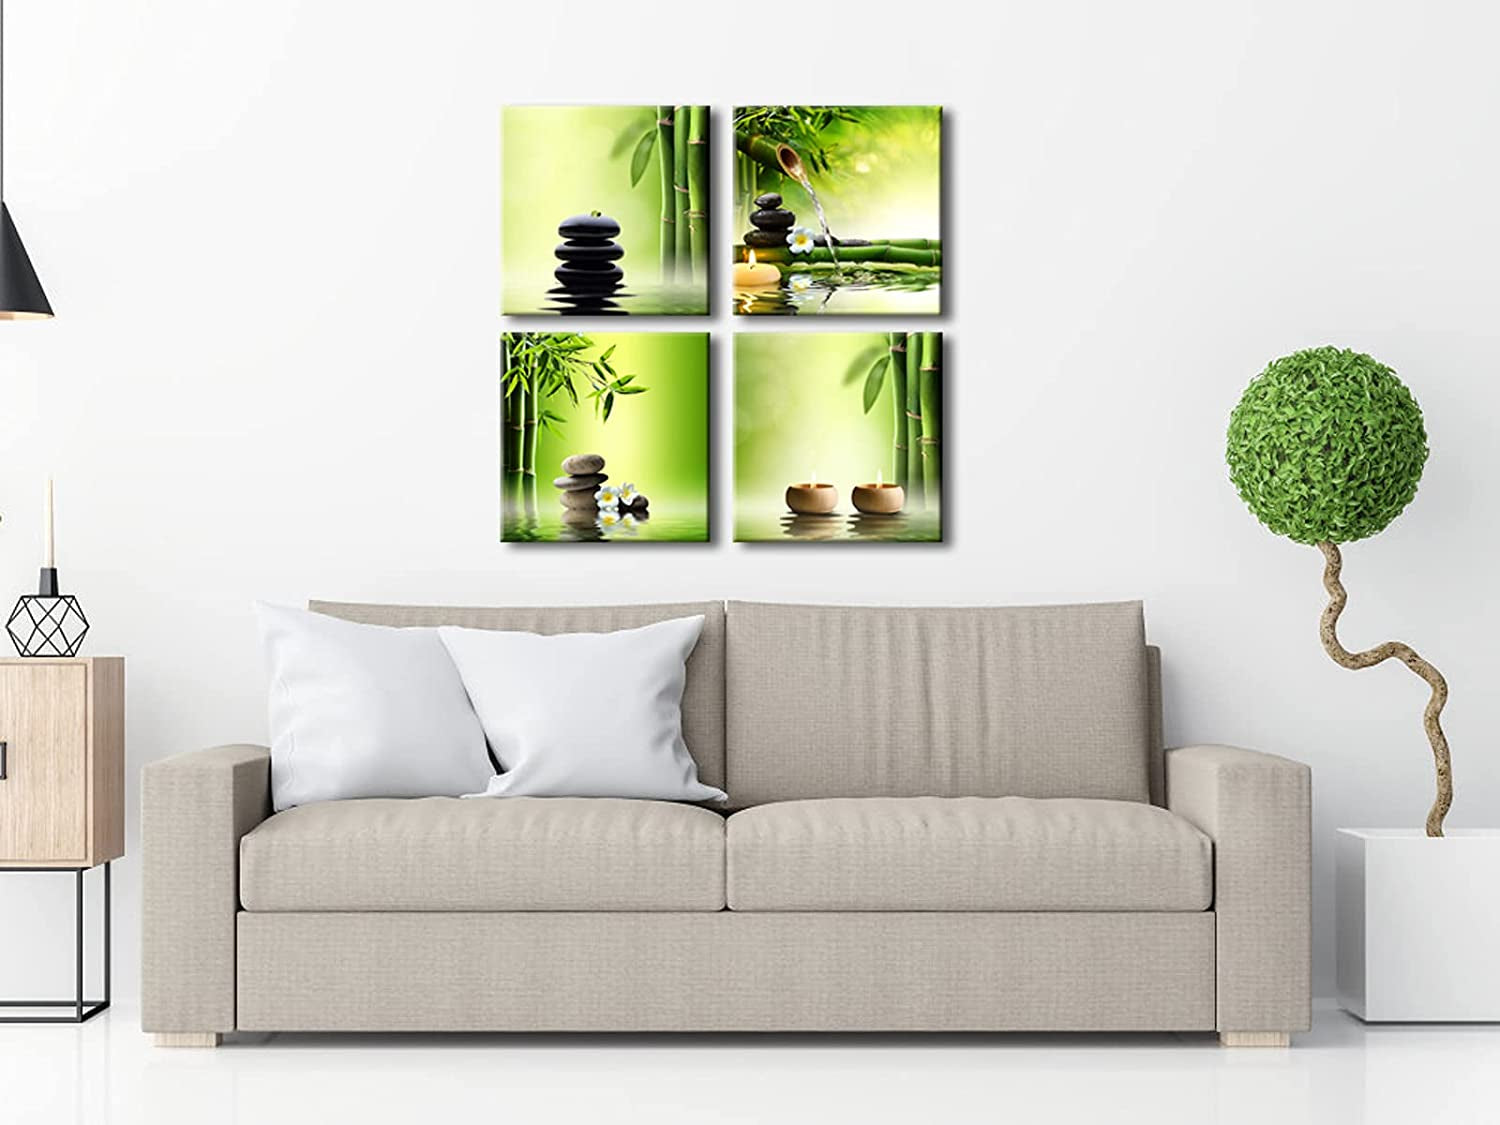 - Modern 4 Panels Stretched and Framed Contemporary Zen Giclee Canvas Prints Perfect Bamboo Green Pictures Paintings on Canvas Wall Art for Home Office Decorations Living Room Bedroom